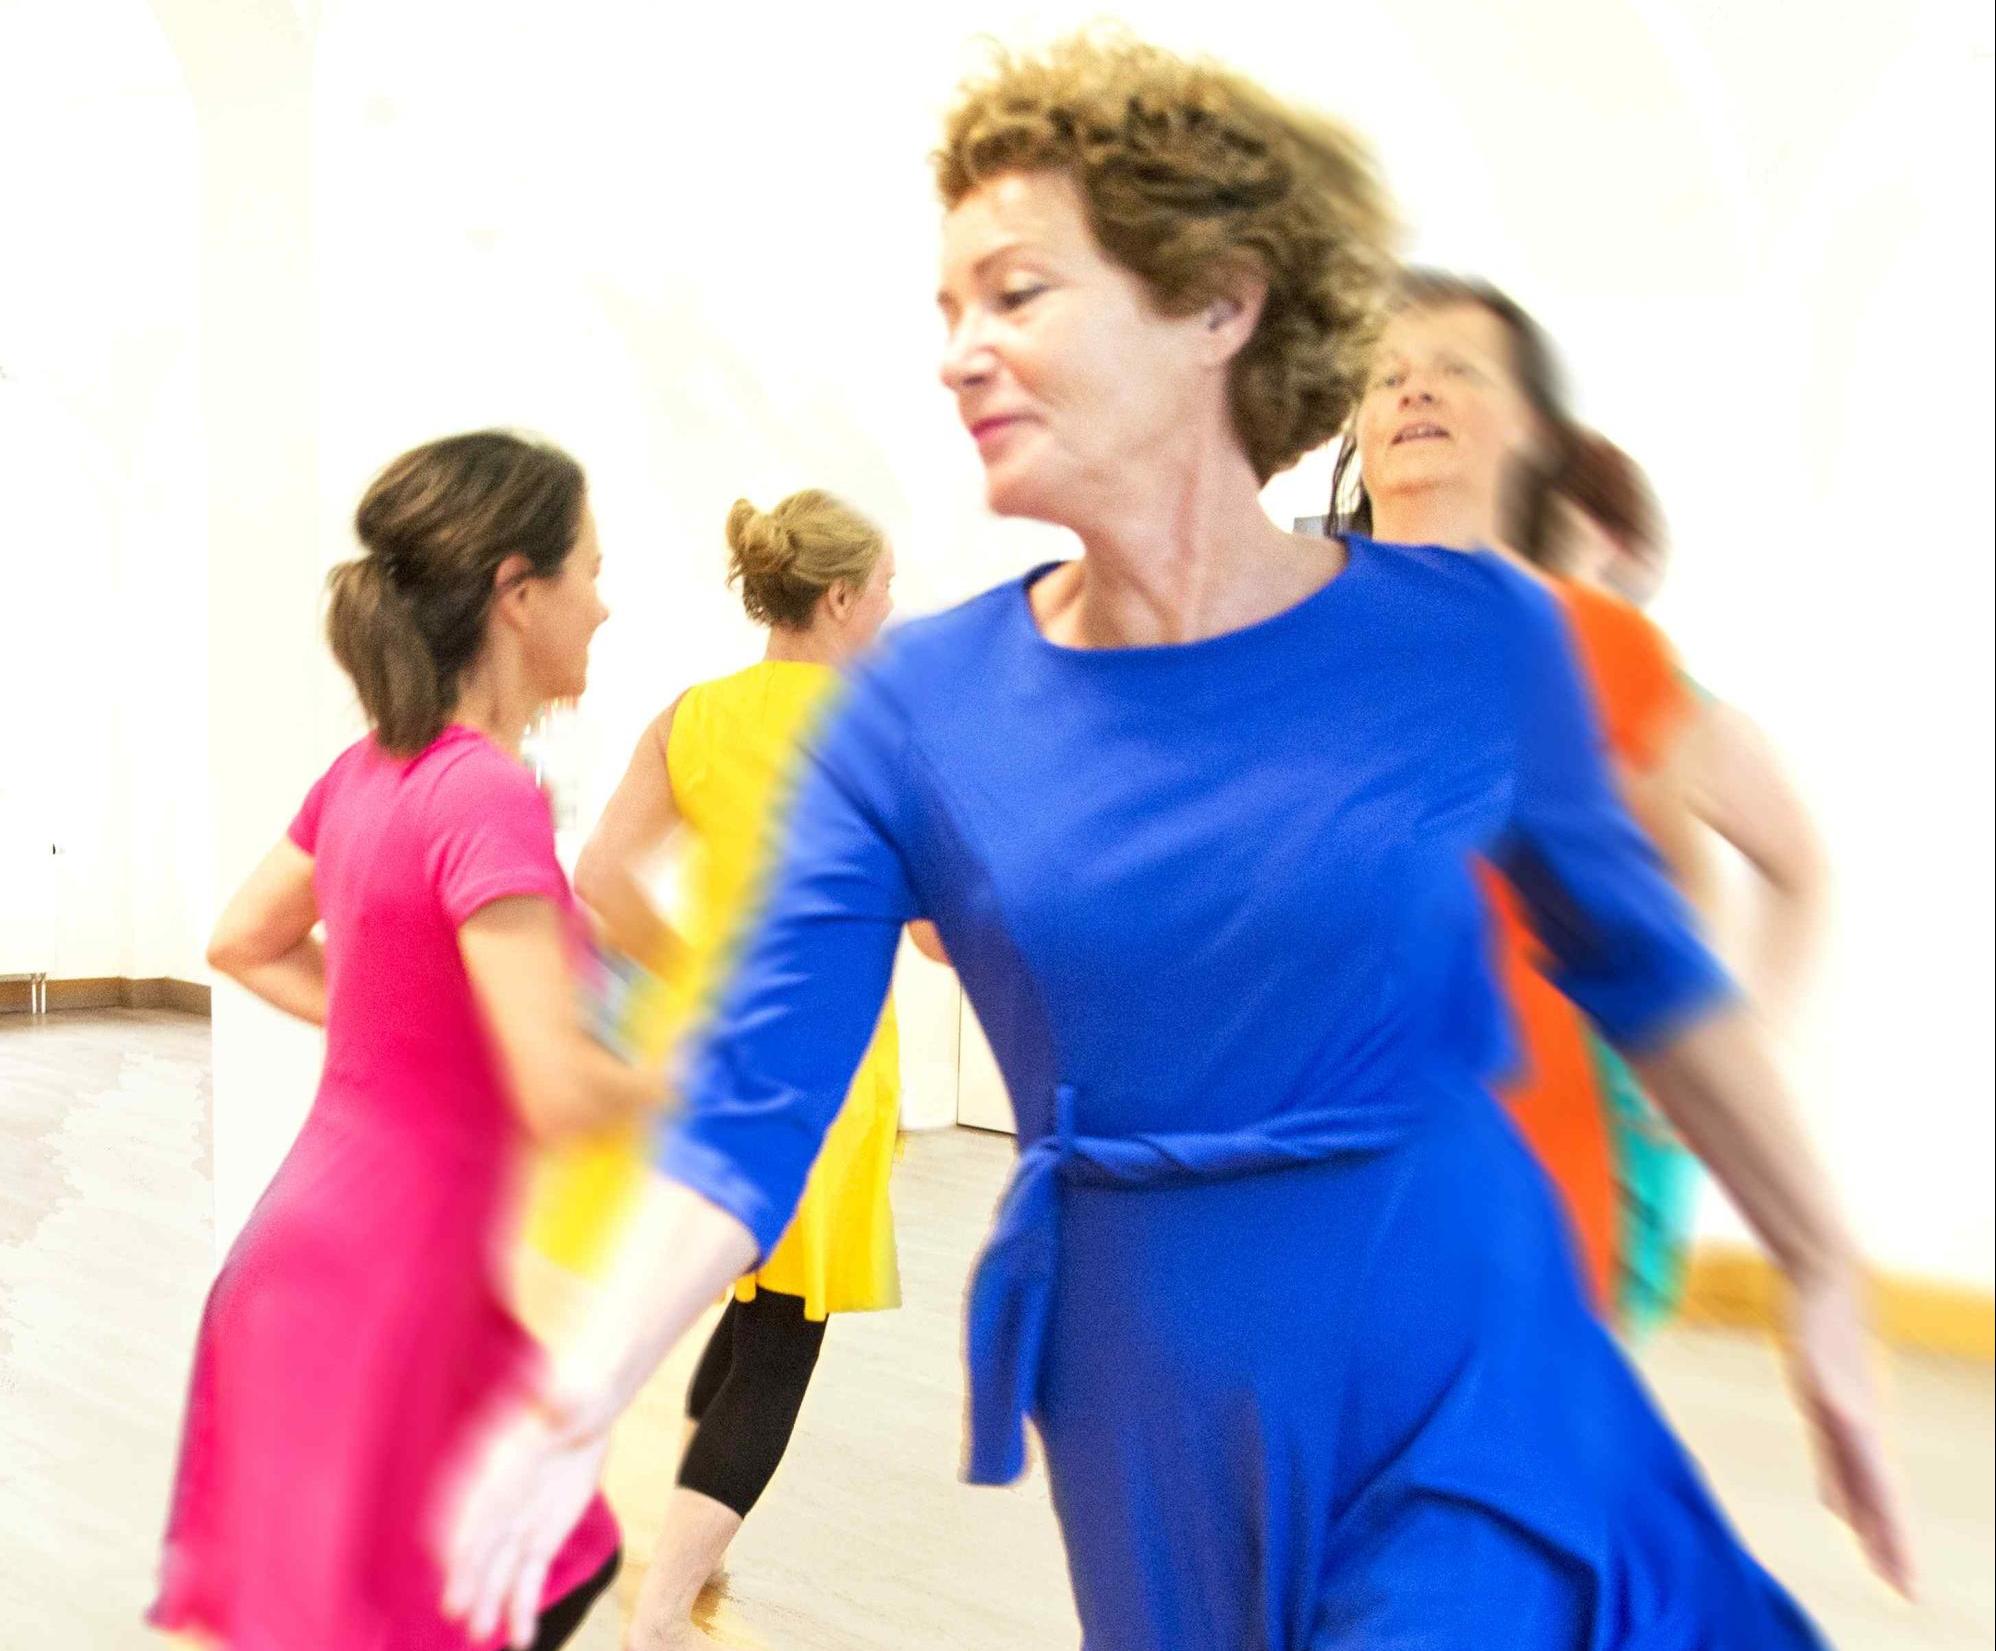 Several women in brightly colored dresses walk in a circle, in the foreground is a lady in a royal blue dress